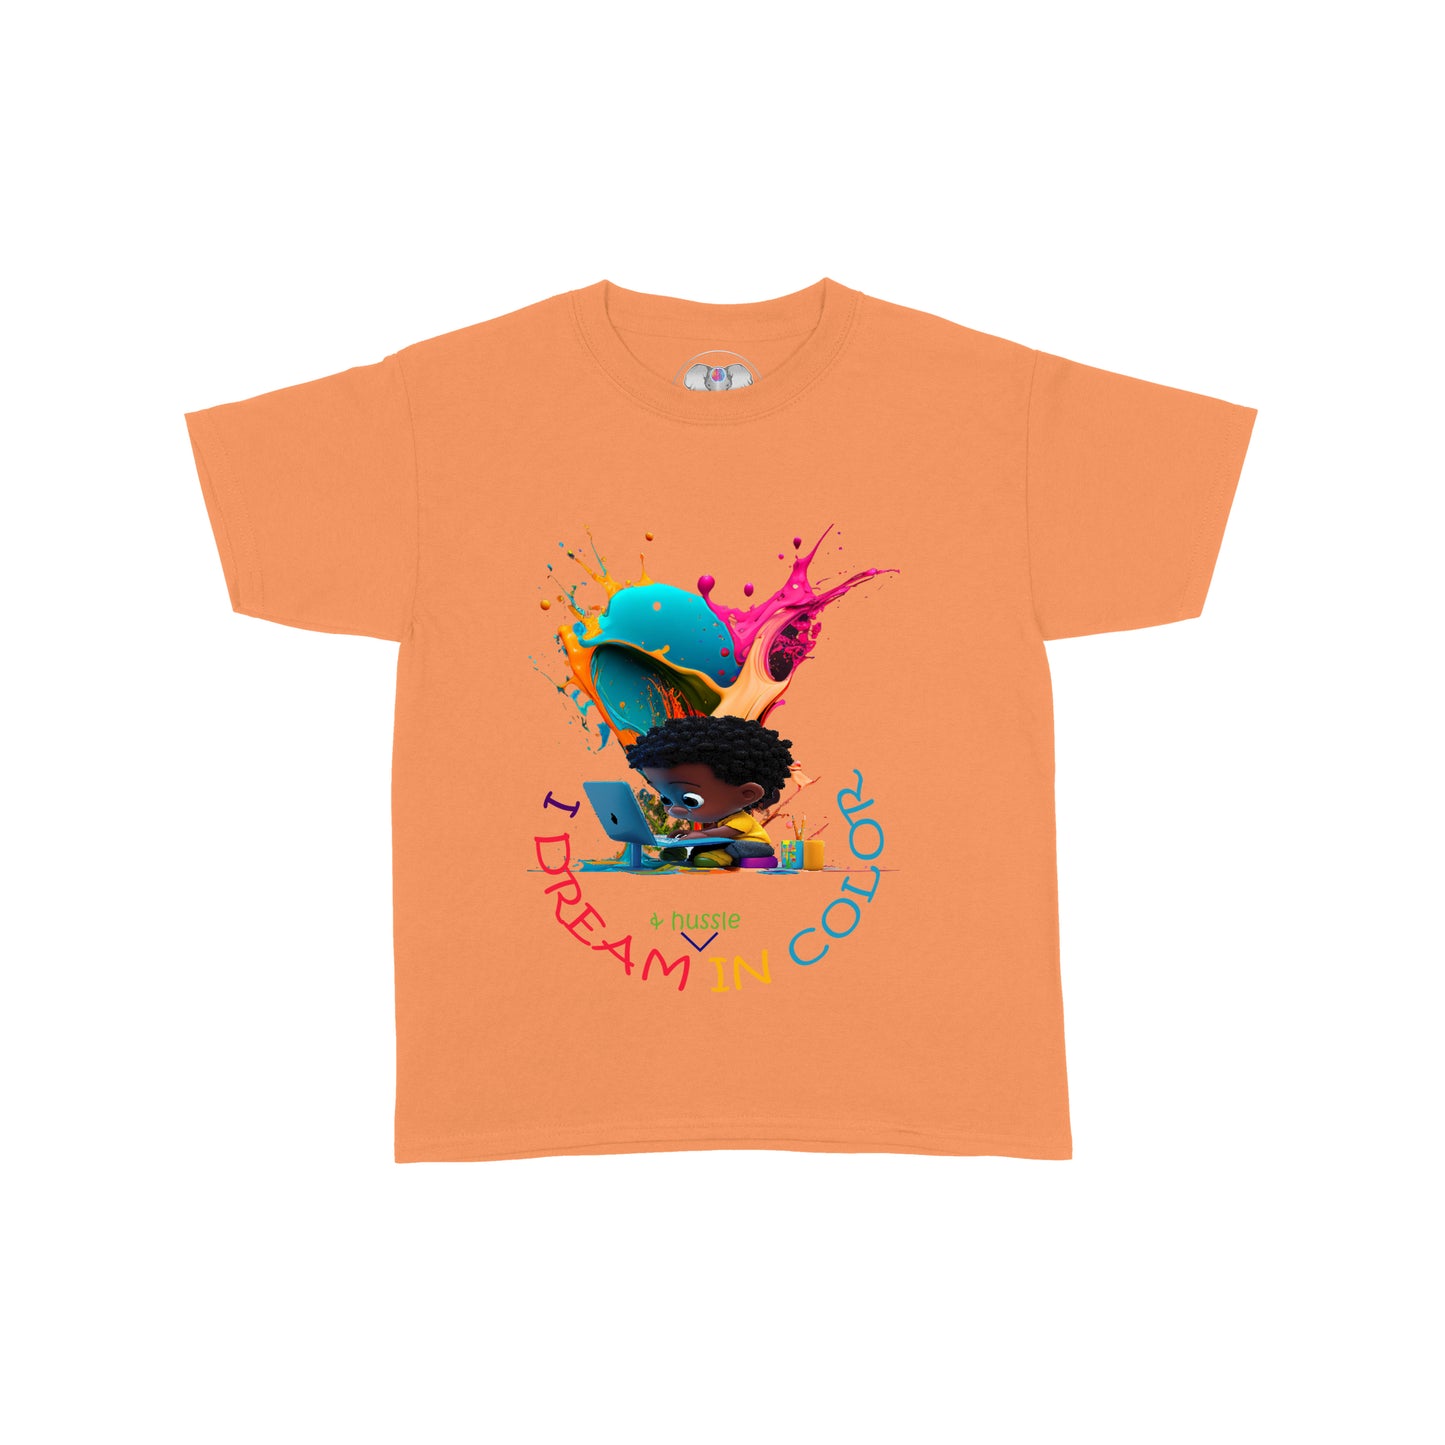 I Dream In Color Graphic T-shirt Youth